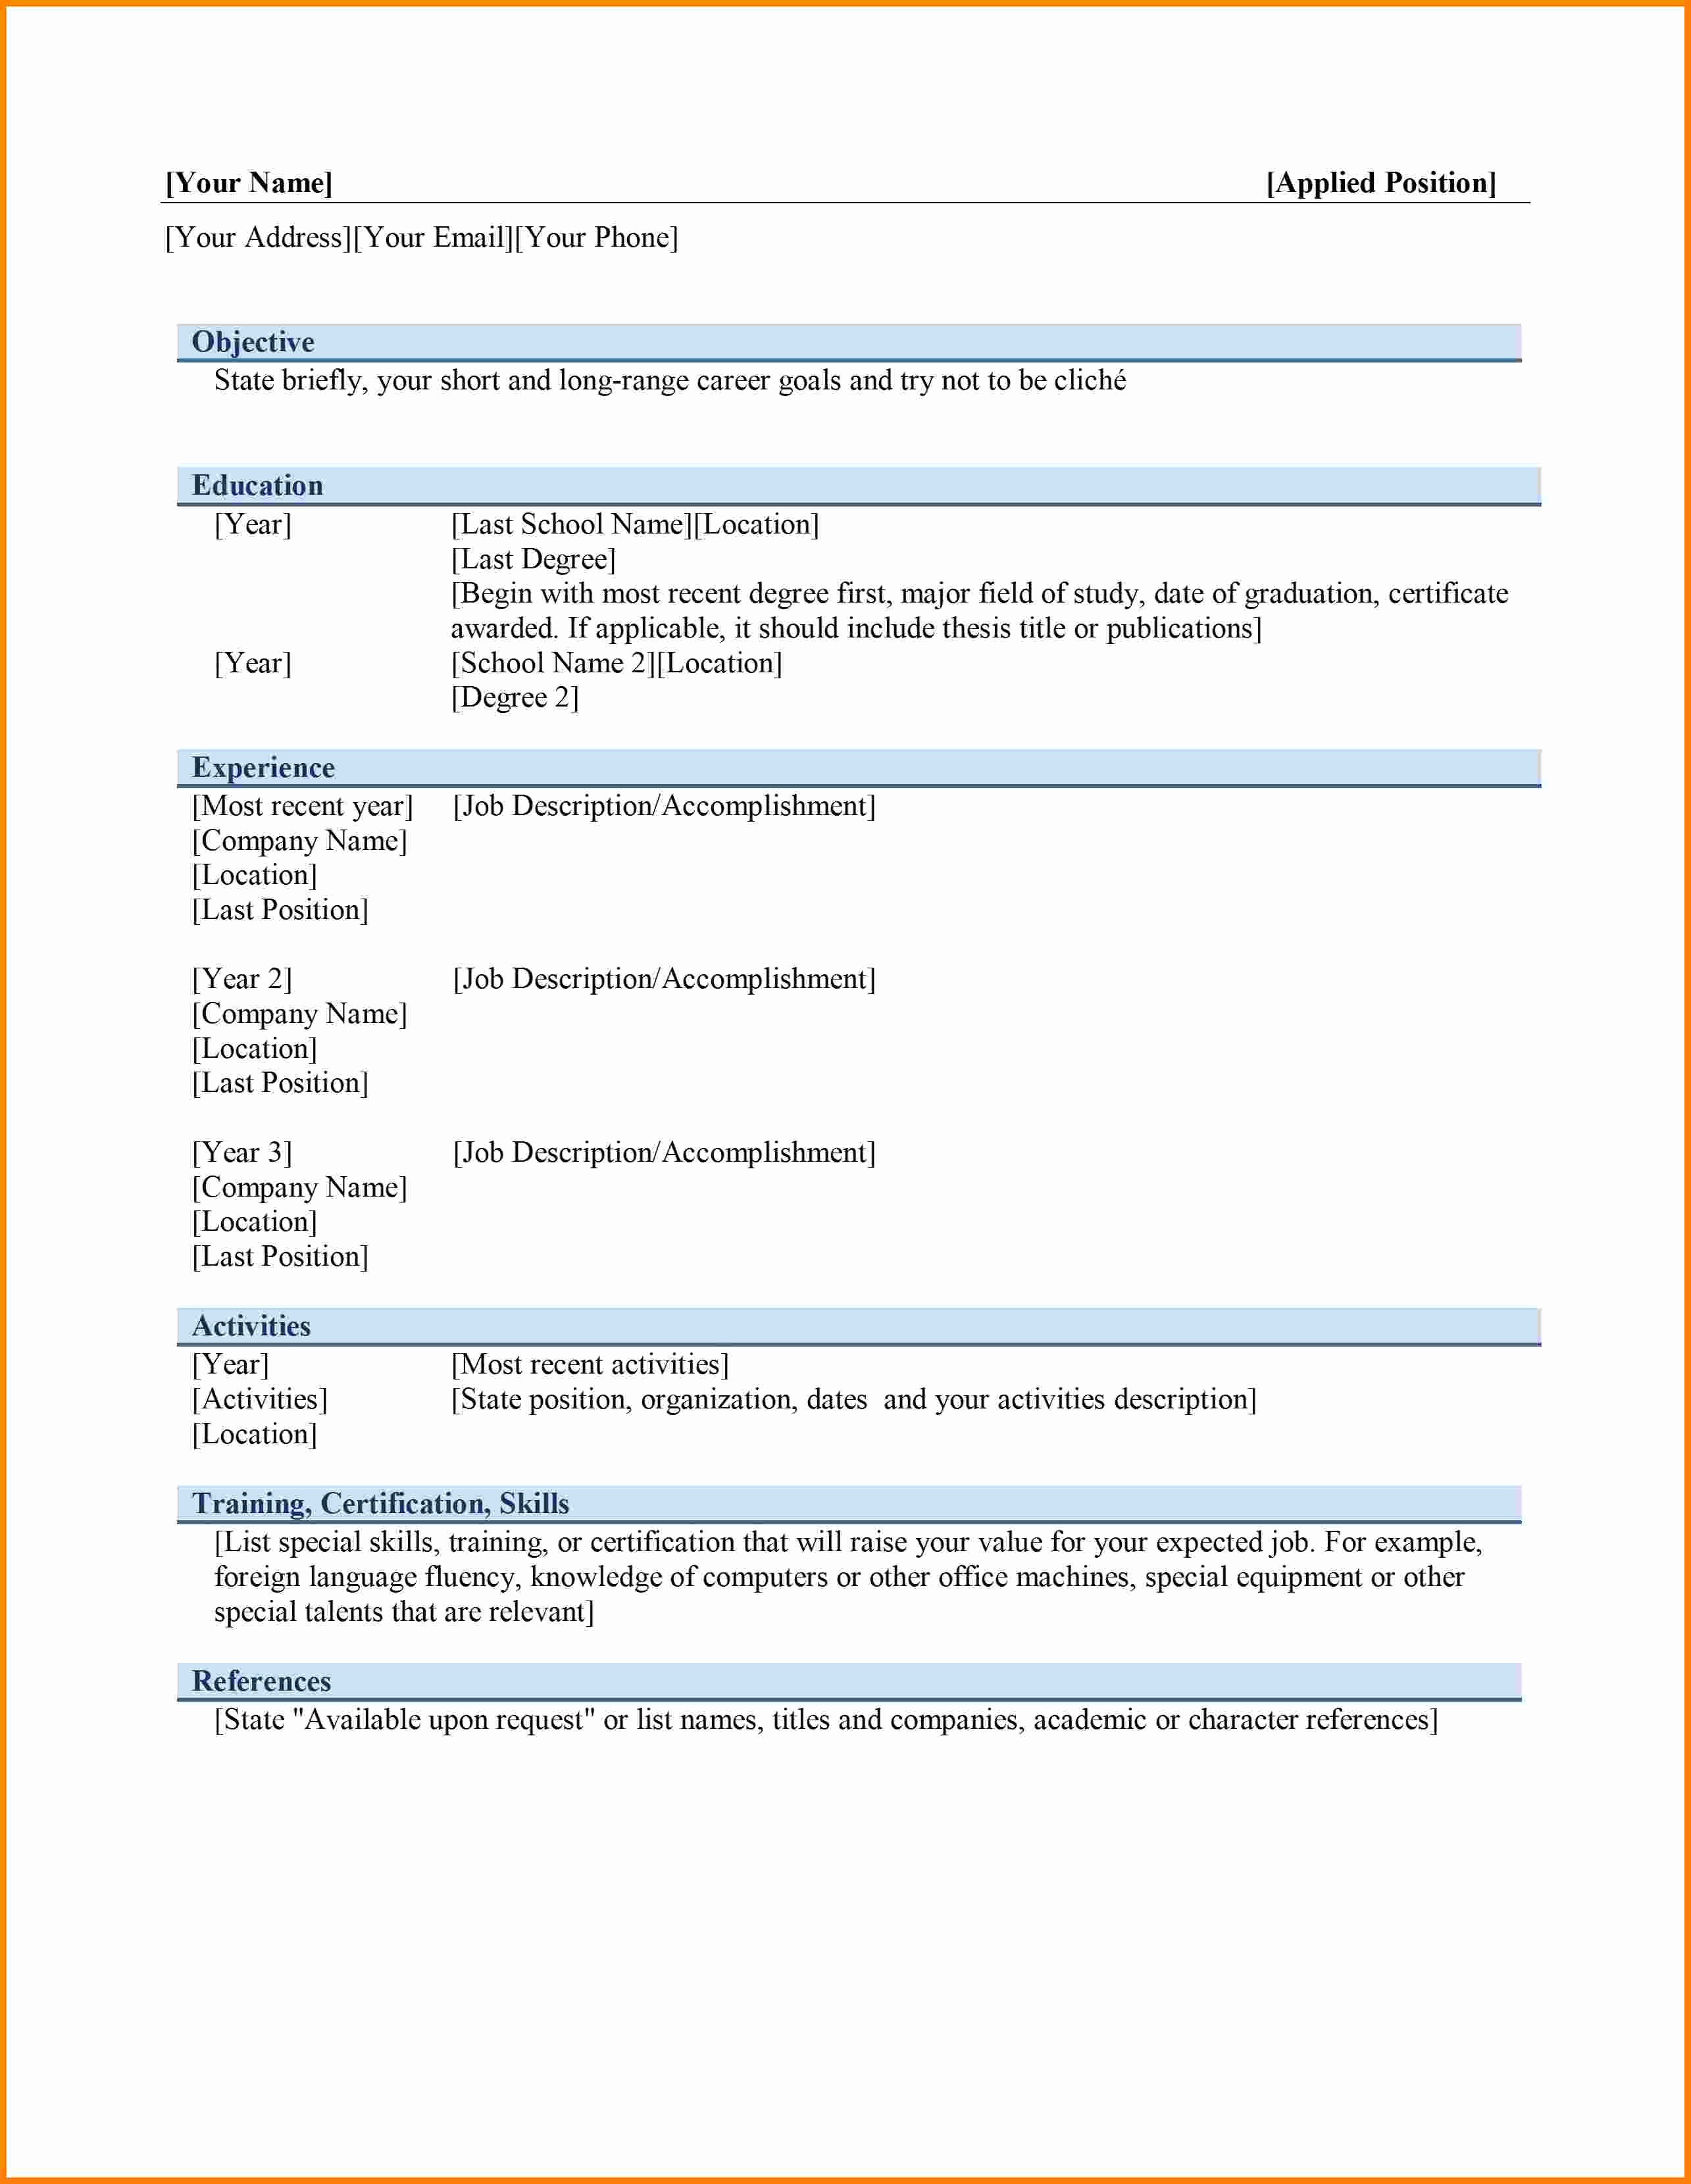 Microsoft Word Template for Resume Lovely 6 Curriculum Vitae In Ms Word